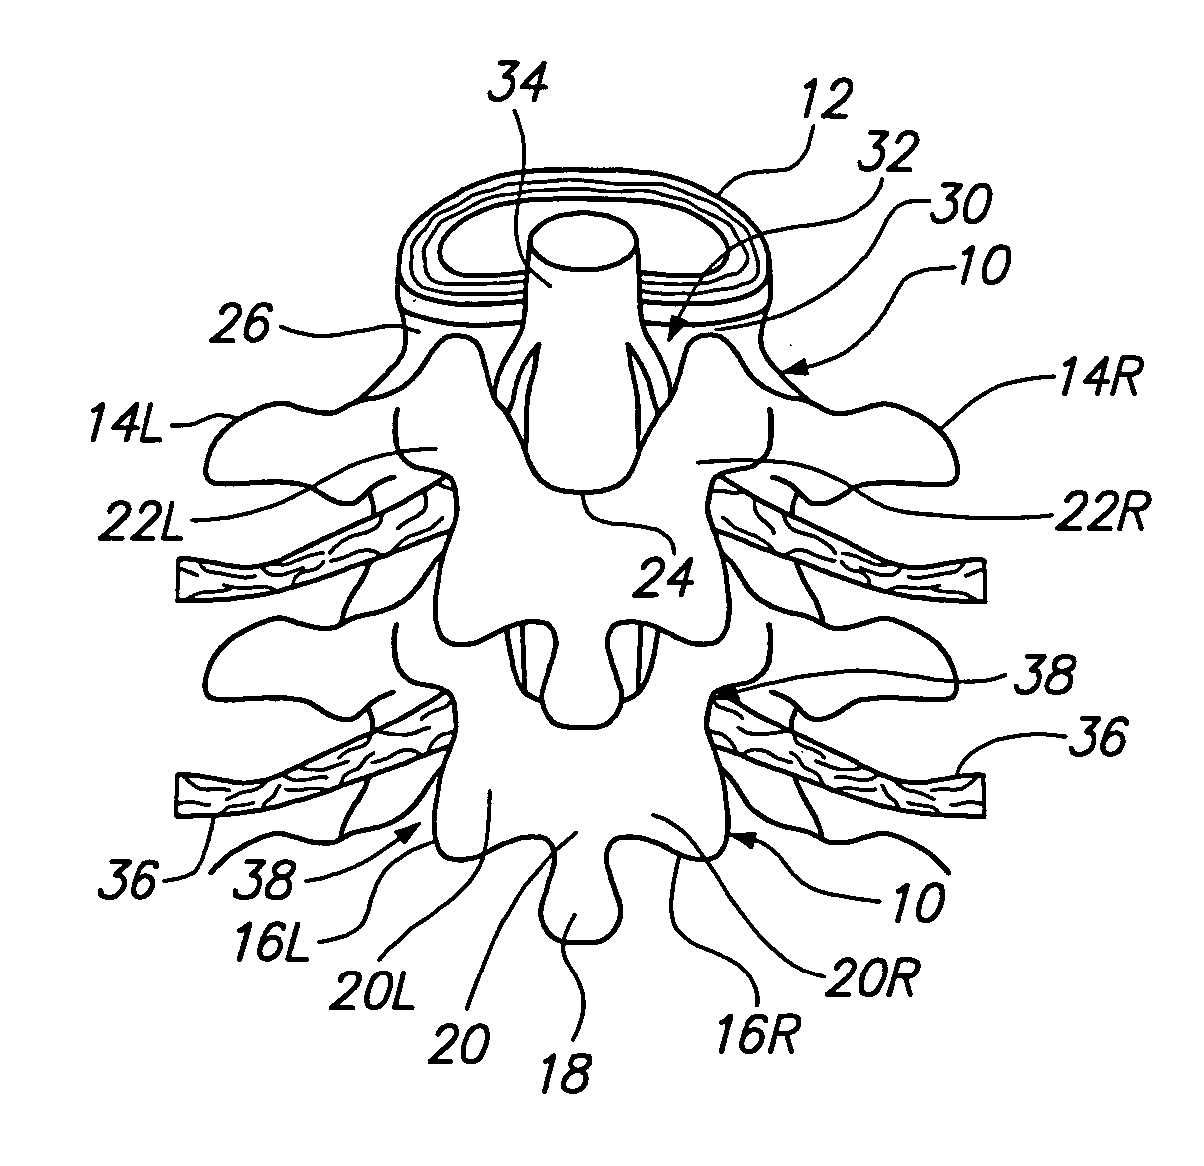 Tissue removal probe with irrigation and aspiration ports